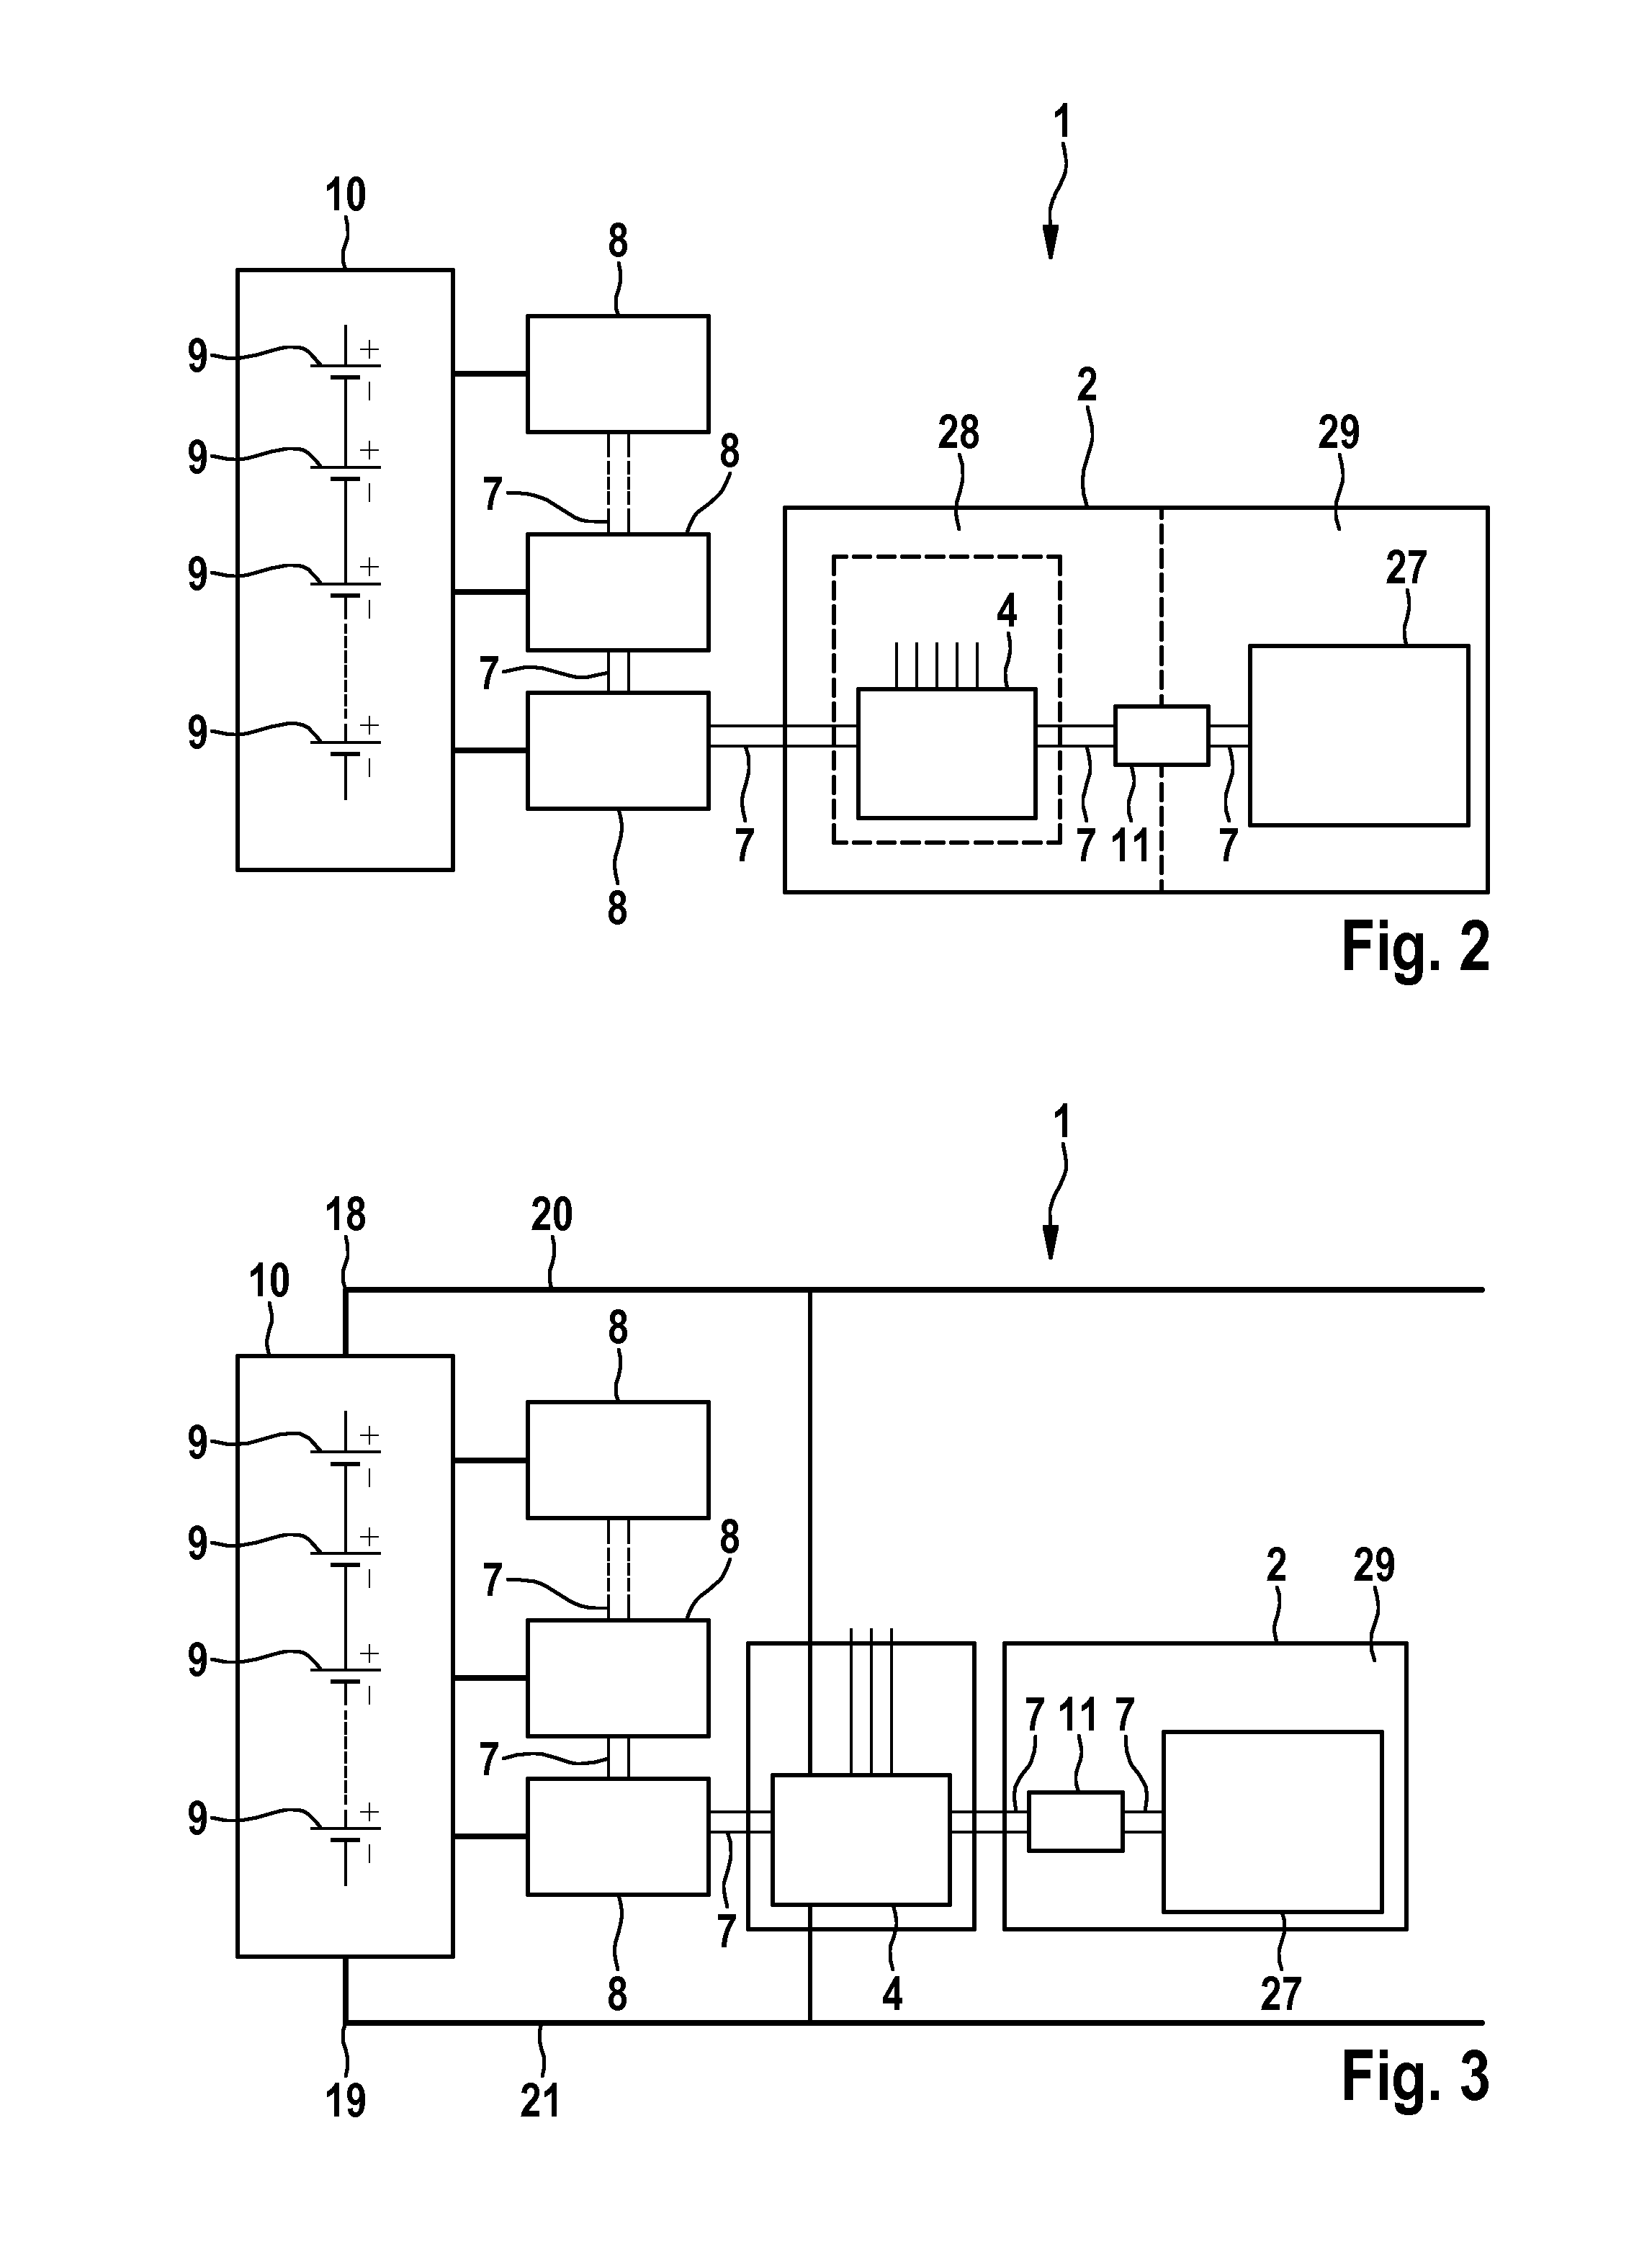 Battery management system for a battery having a plurality of battery cells, and method therefor